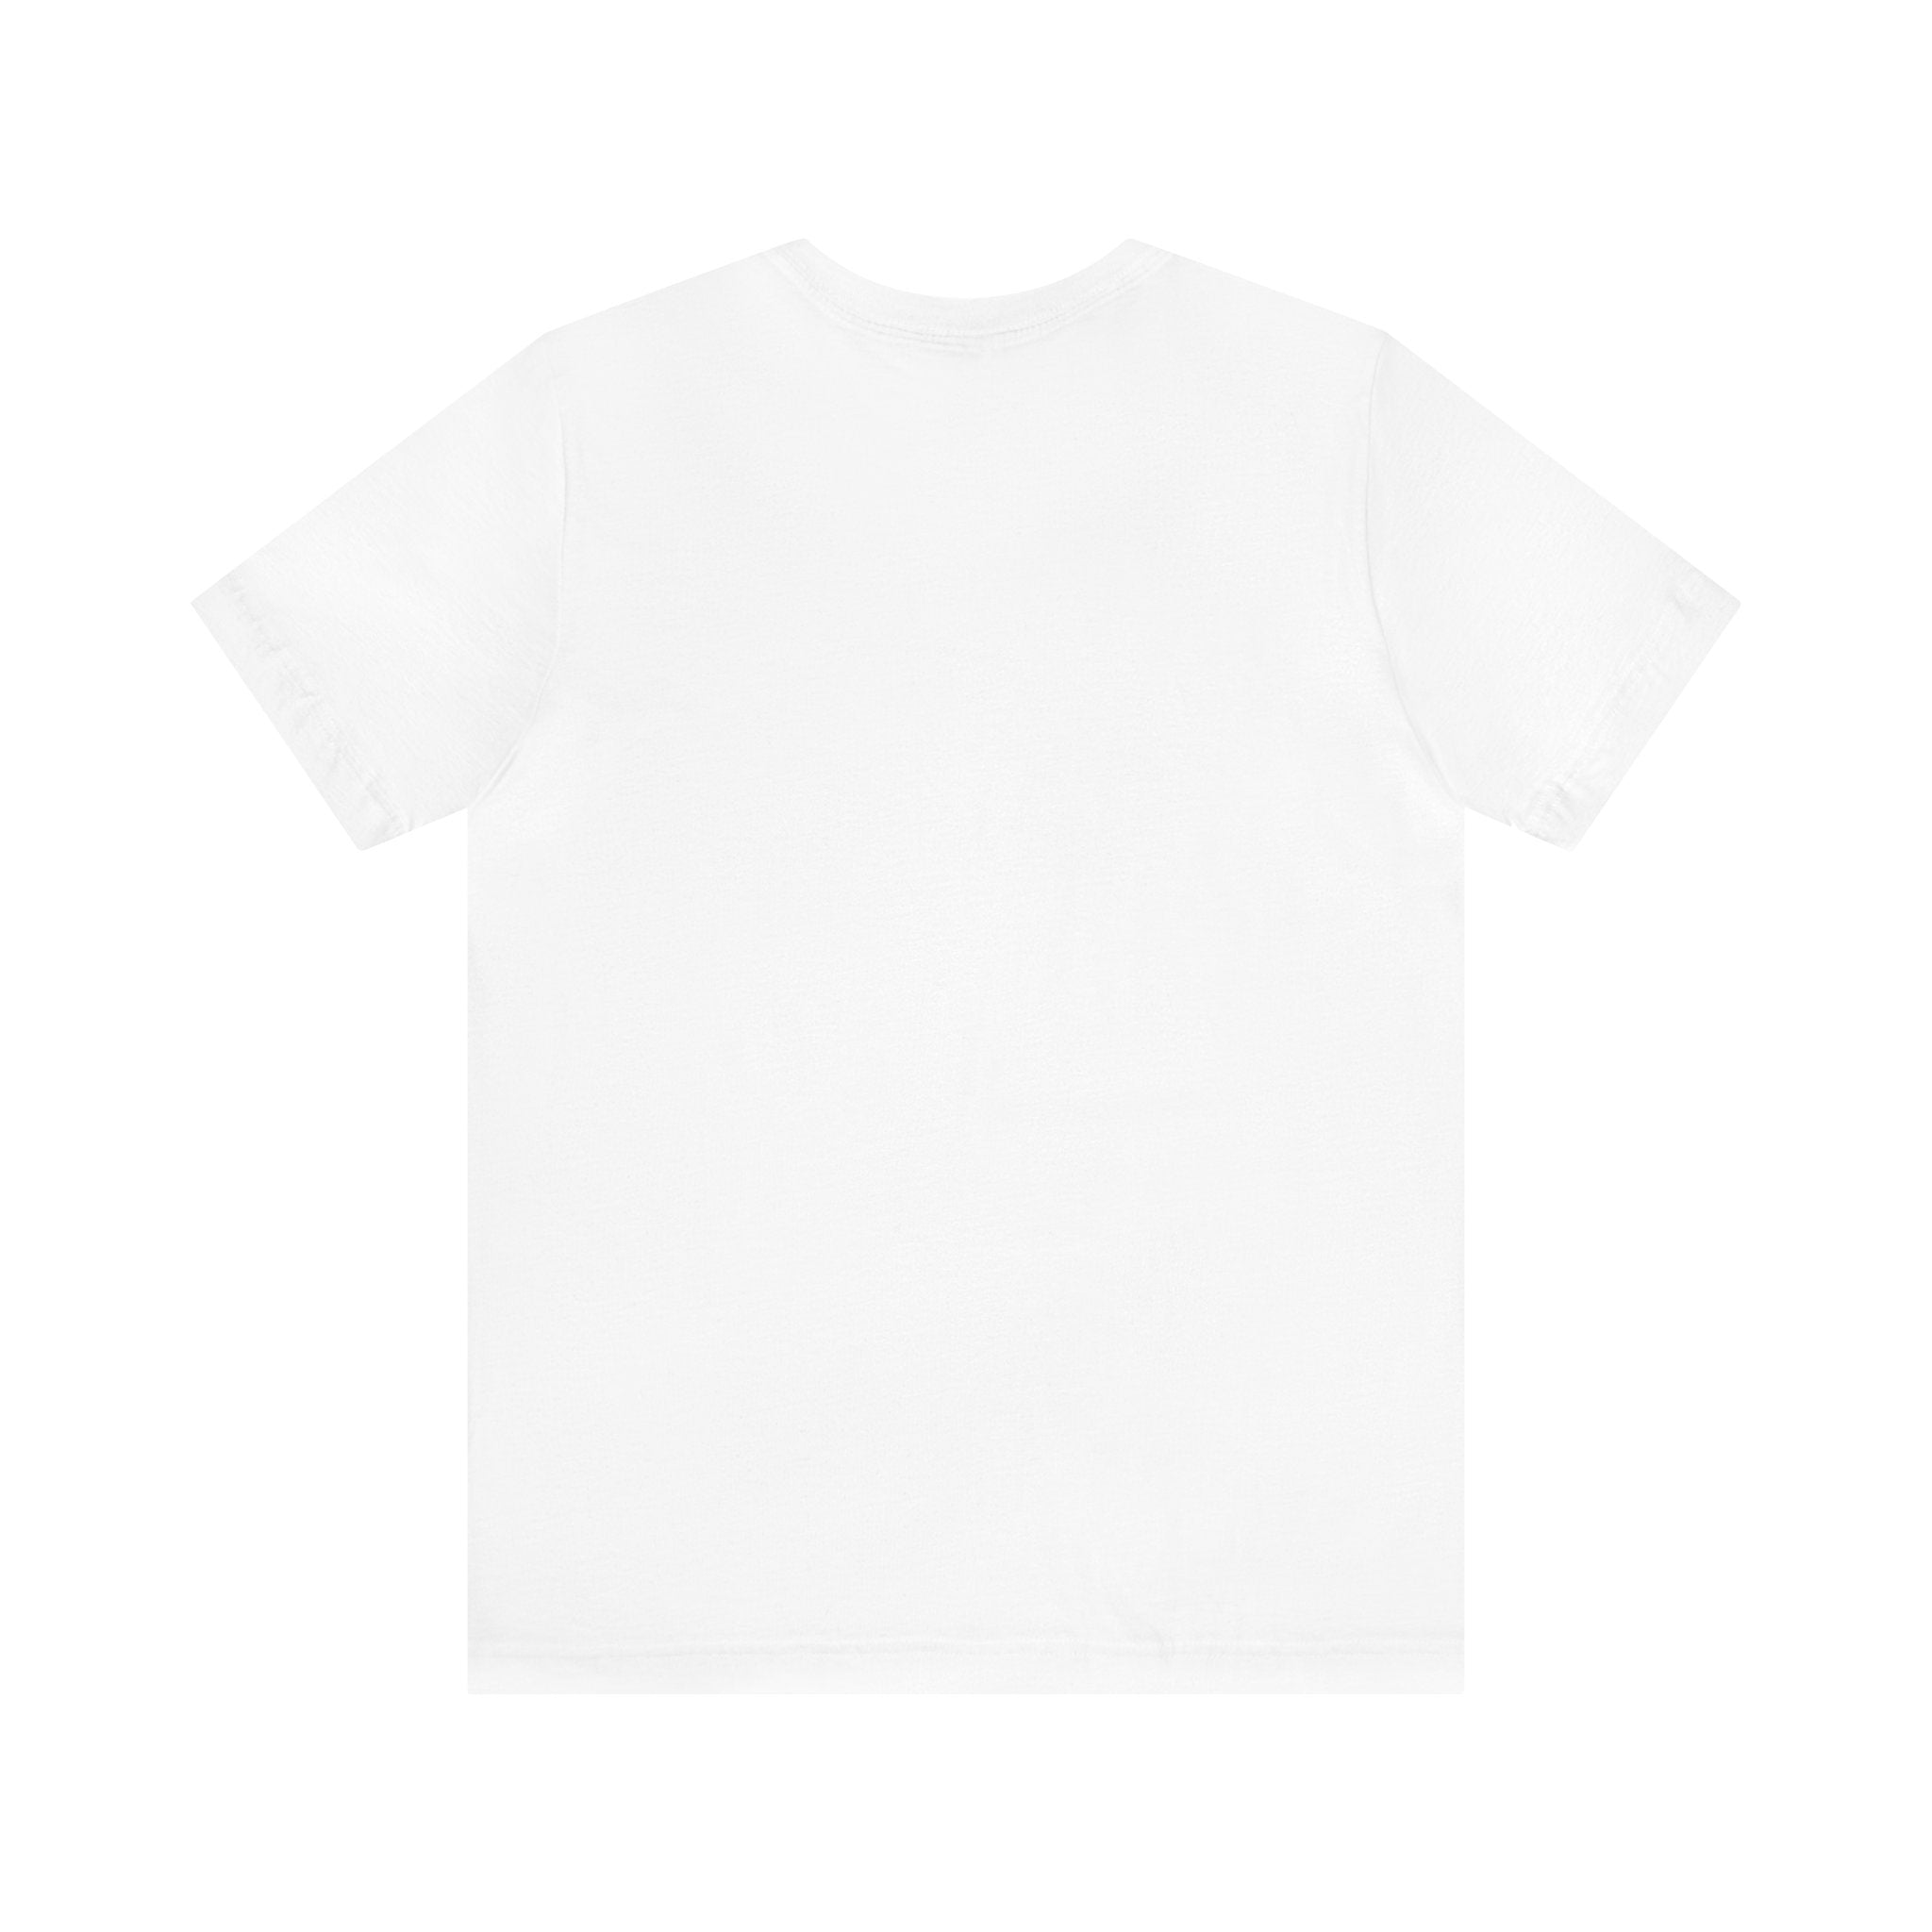 A white You Are Special T-Shirt on a blank background.